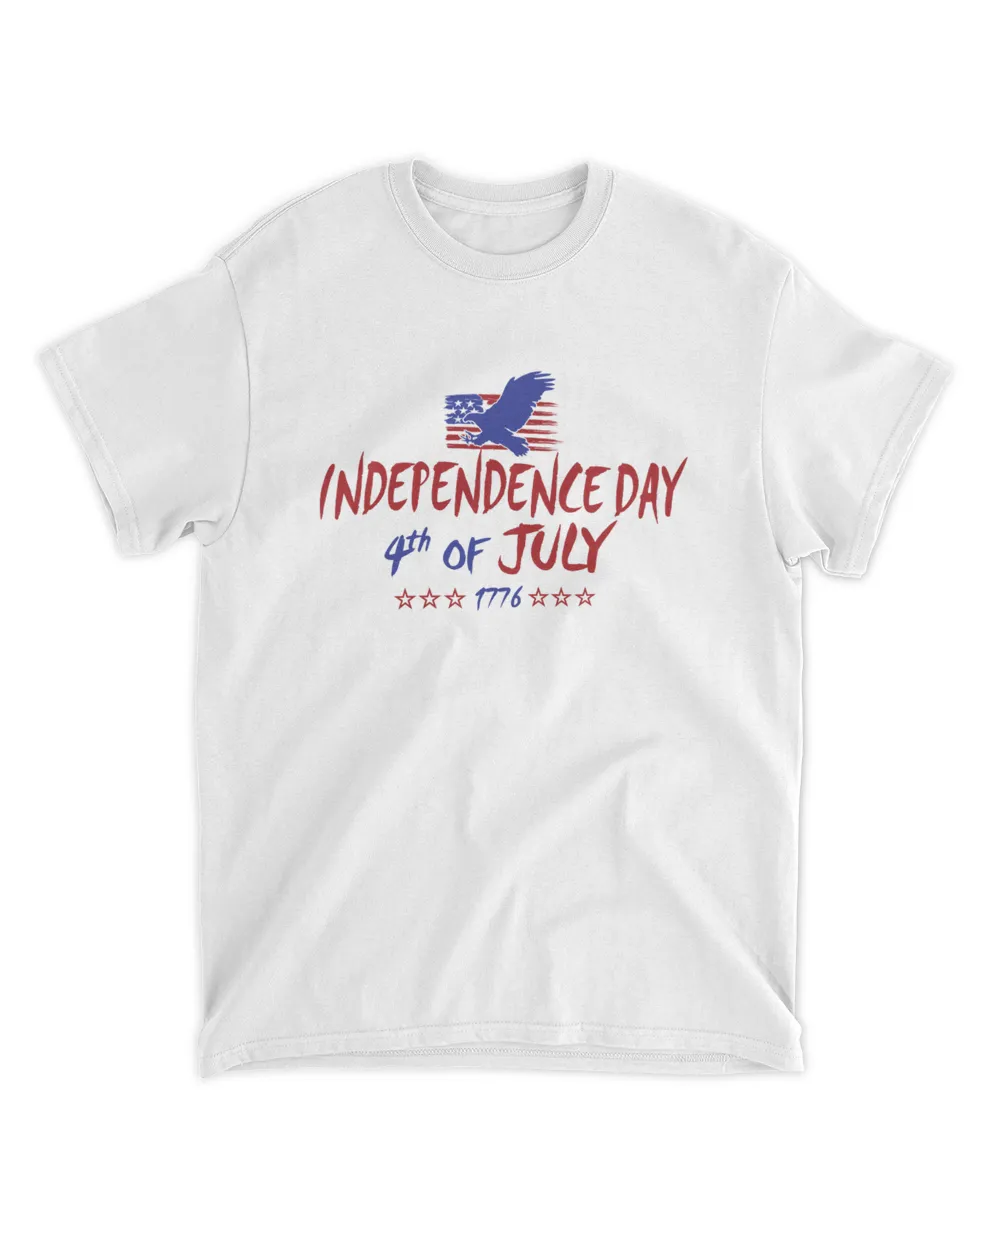 4th of july independence day shirt